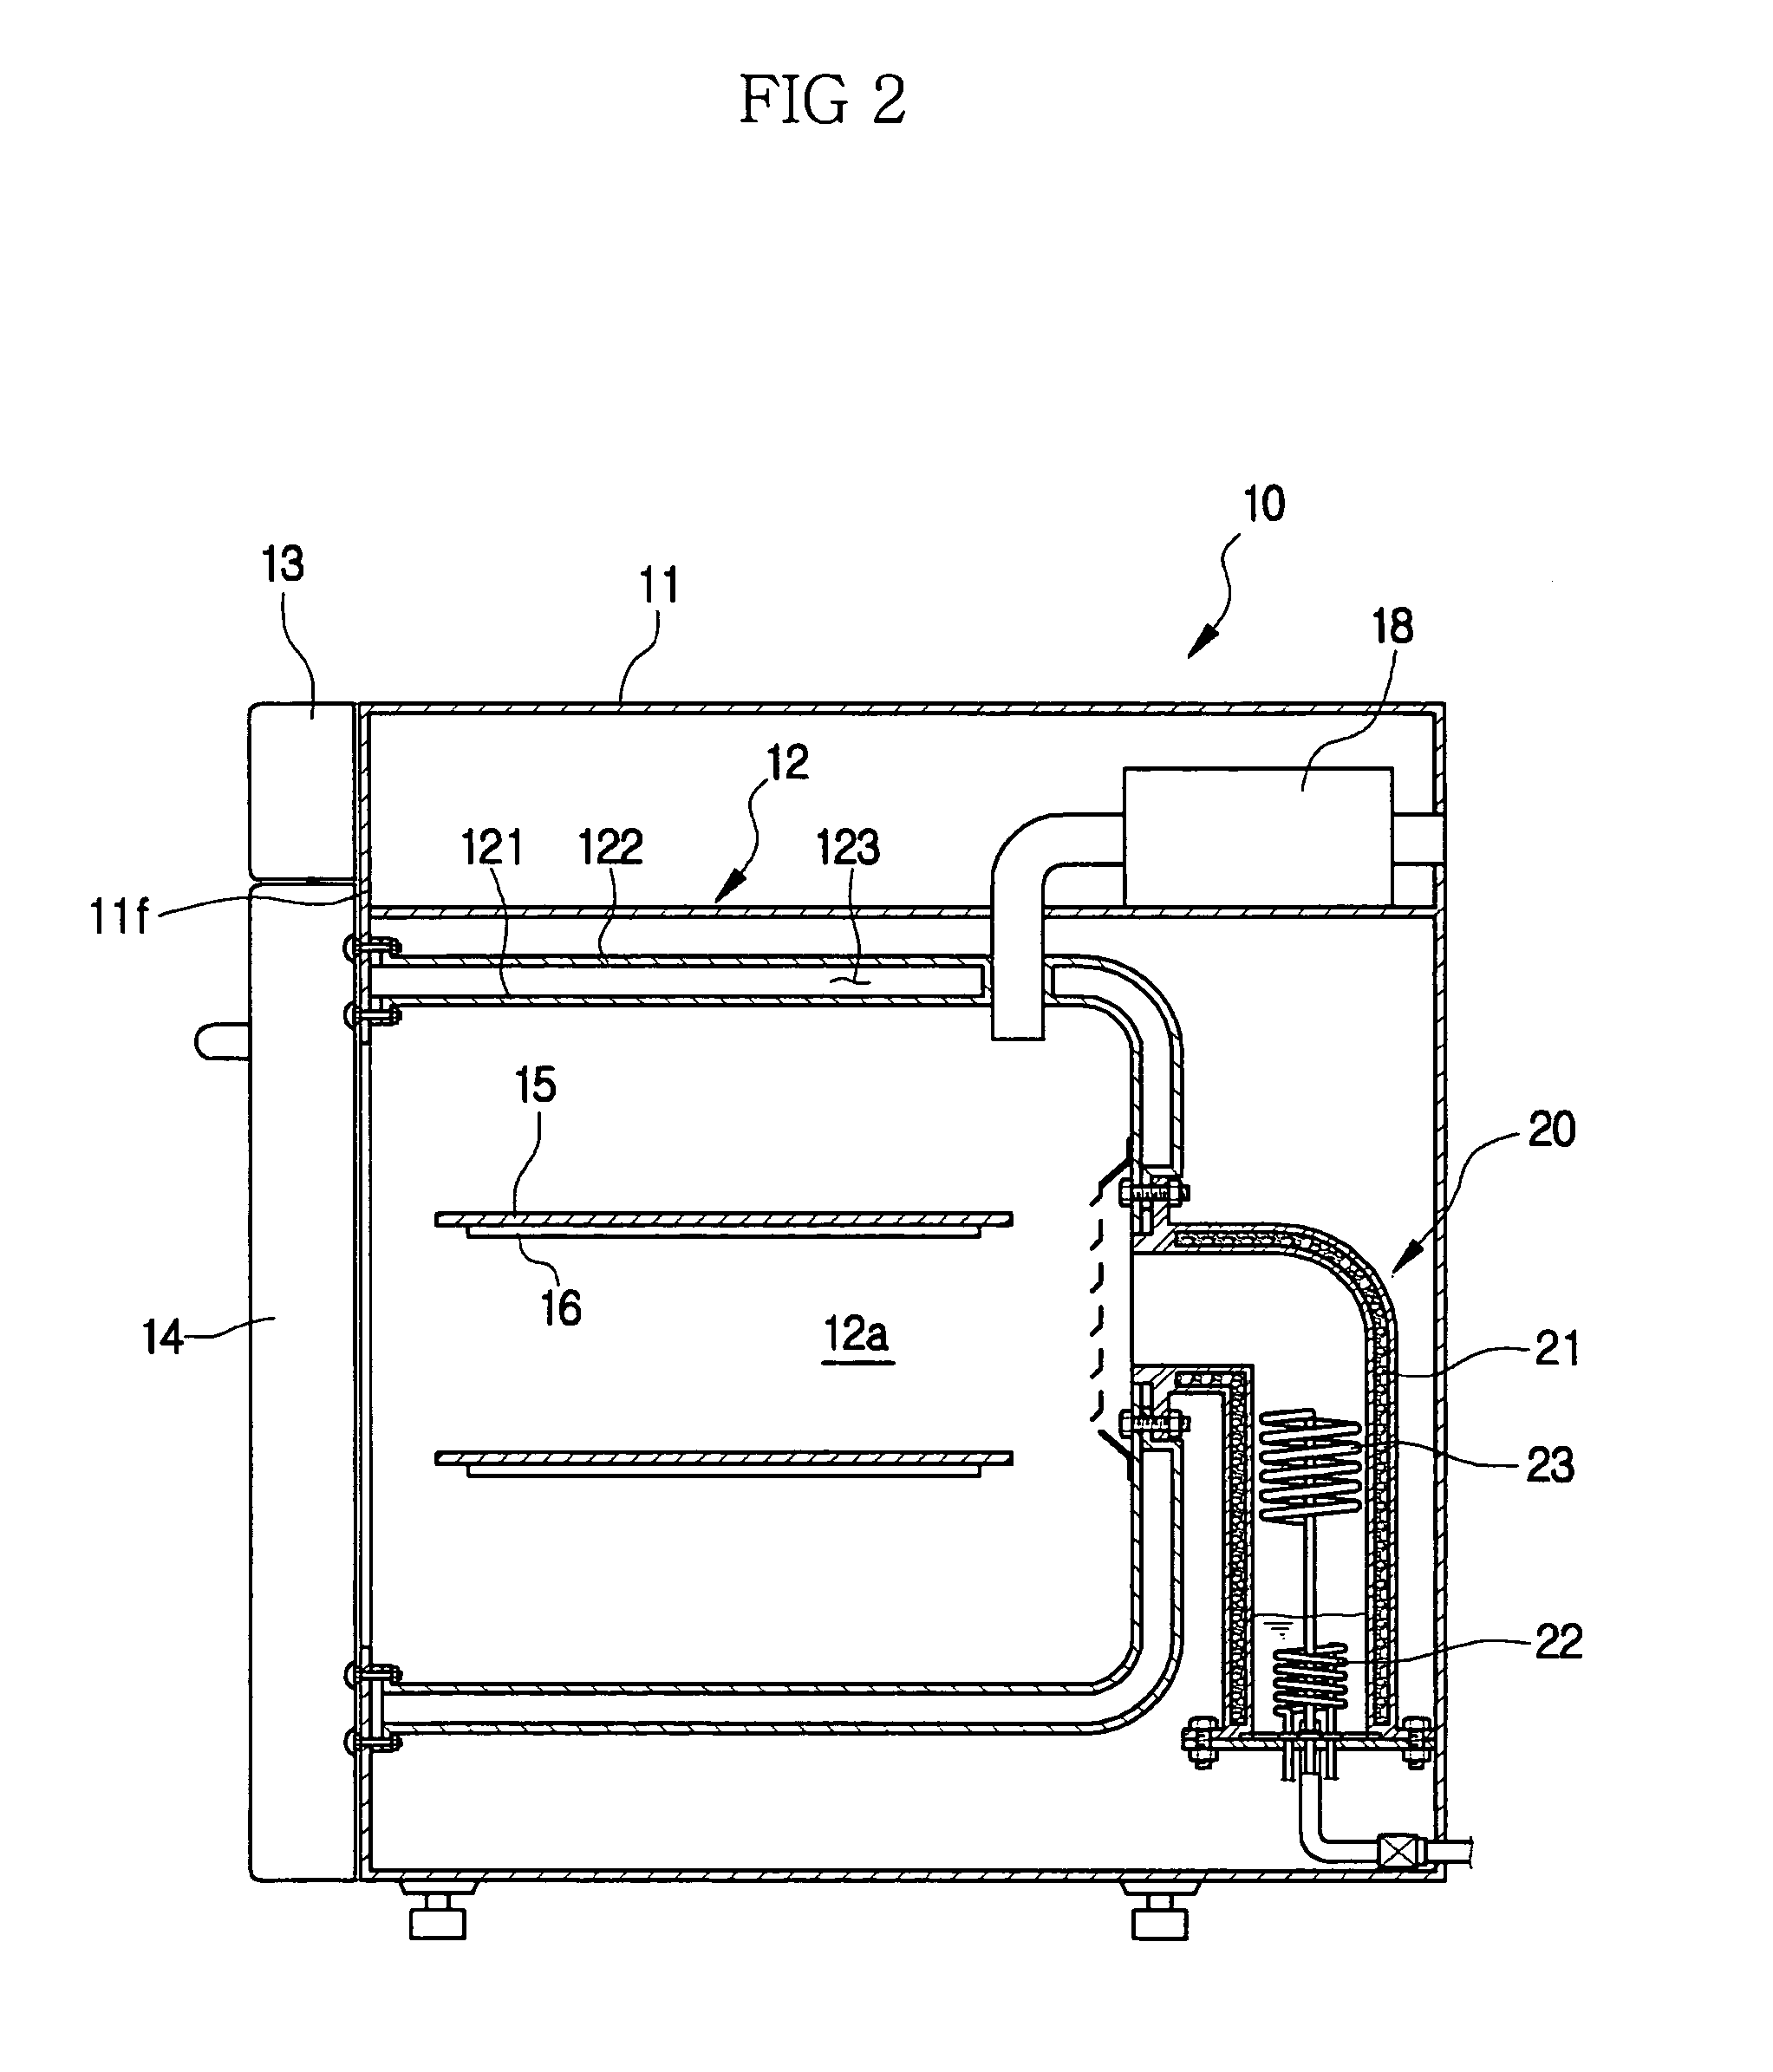 Steam oven having an inner casing including a vacuum